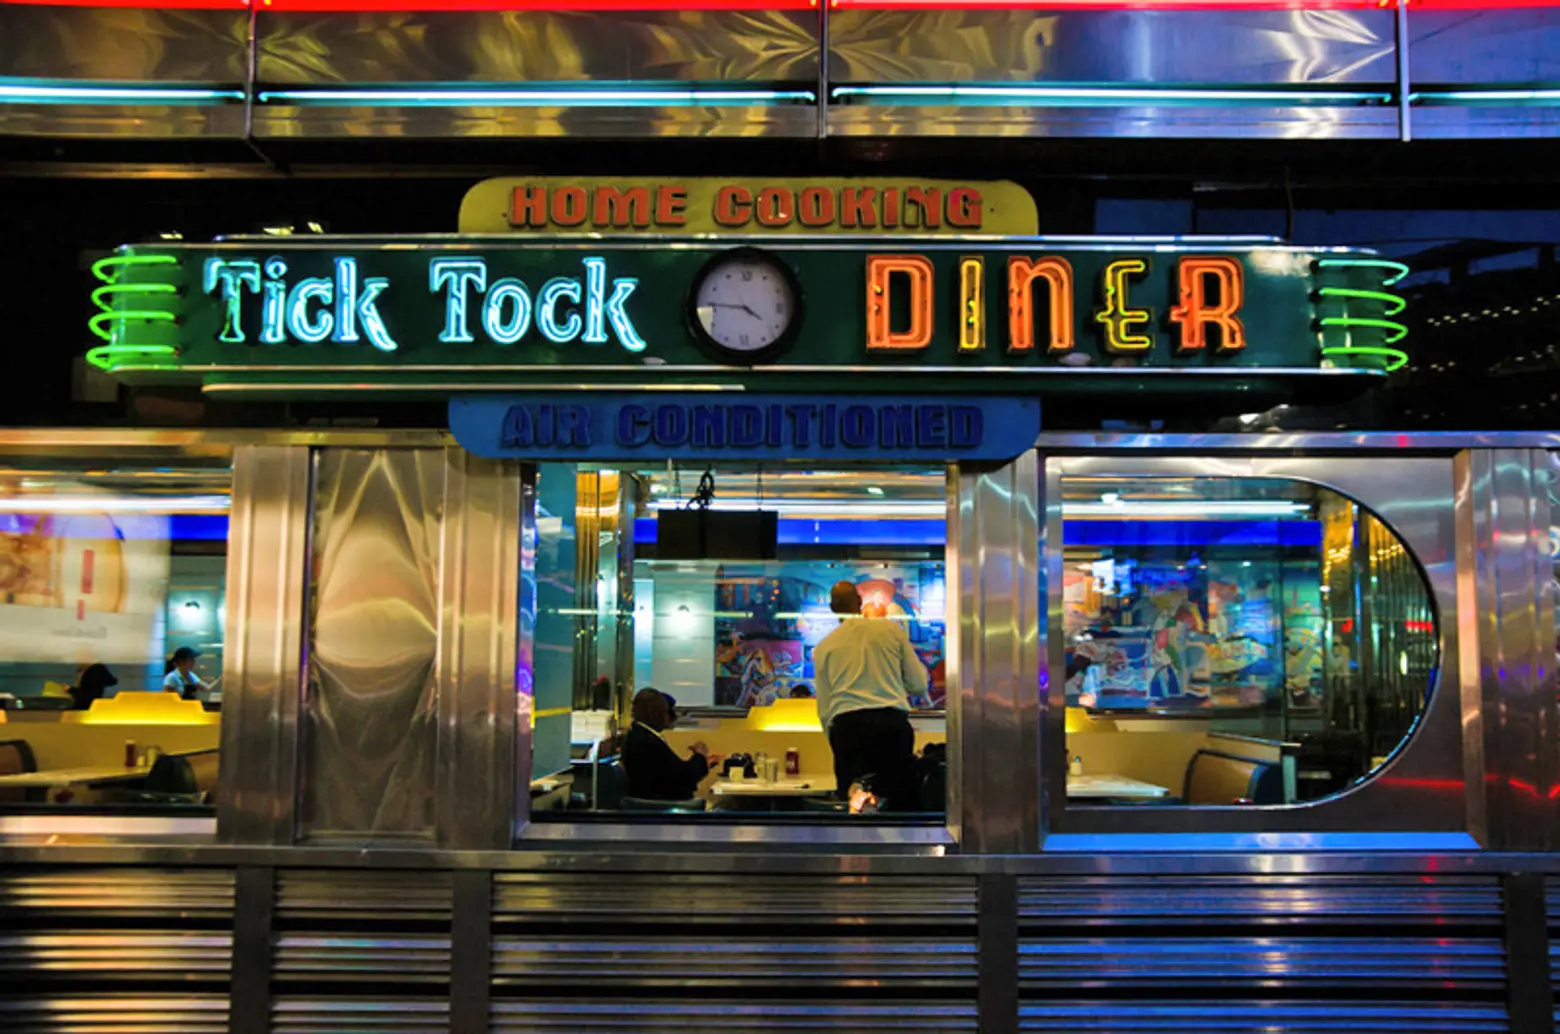 tick tock diner, nyc diner, classic diners, diner architecture